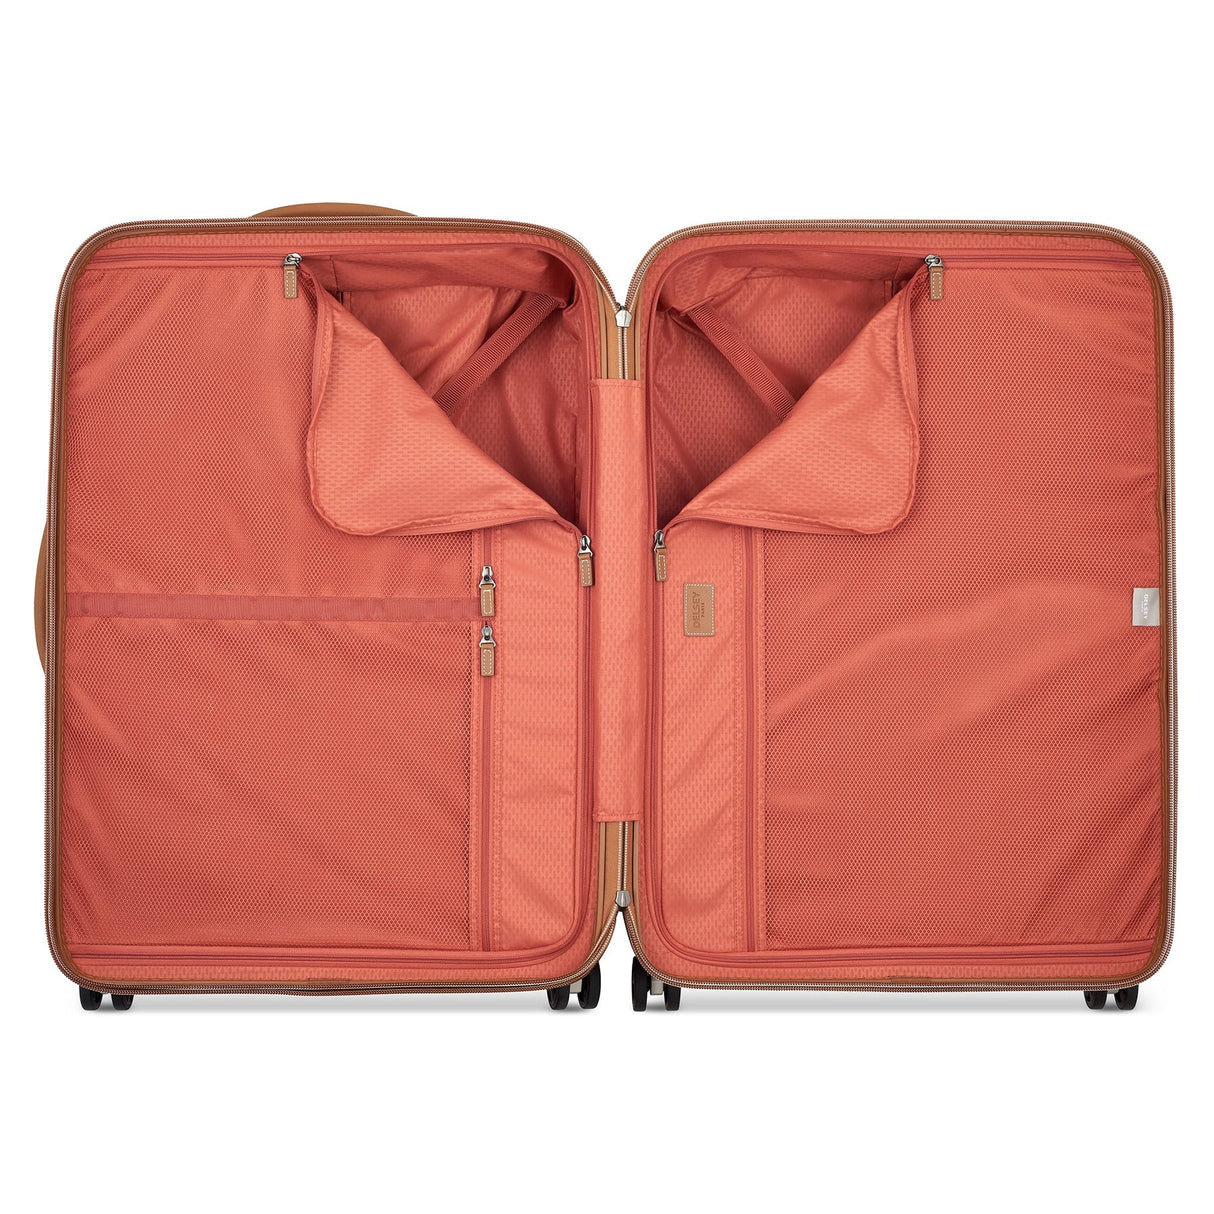 Delsey Chatelet Air 2.0 Large Checked Spinner , , delsey-chatelet-air-2.0-40167682115-07_1800x1800_230b3c02-dcfe-48fe-9e9d-1b39105eaac6